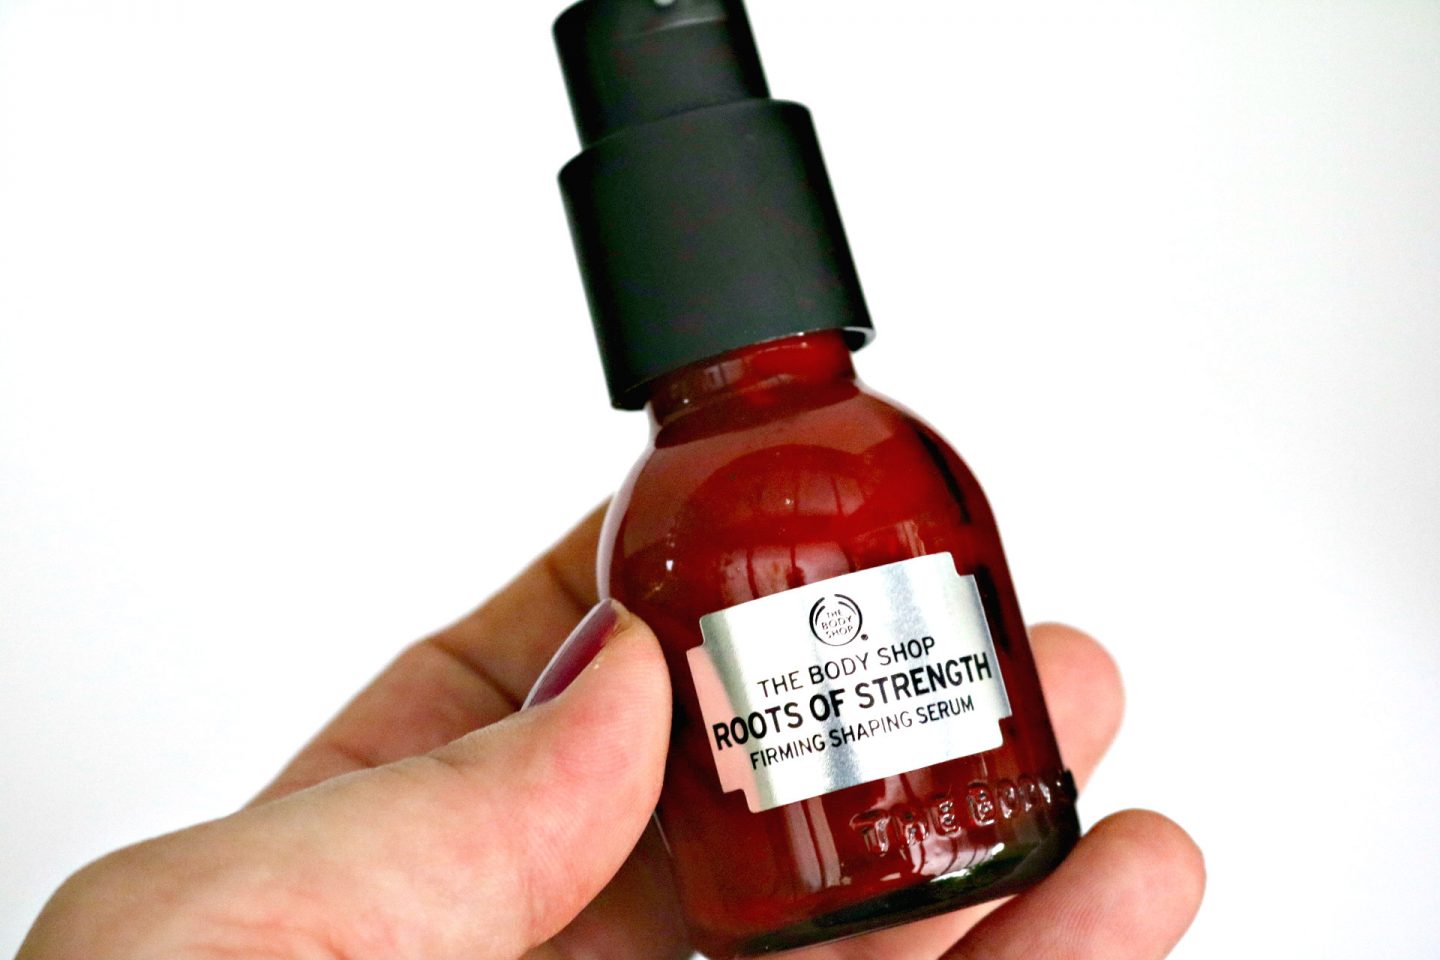 The Body Shop Roots of Strength serum